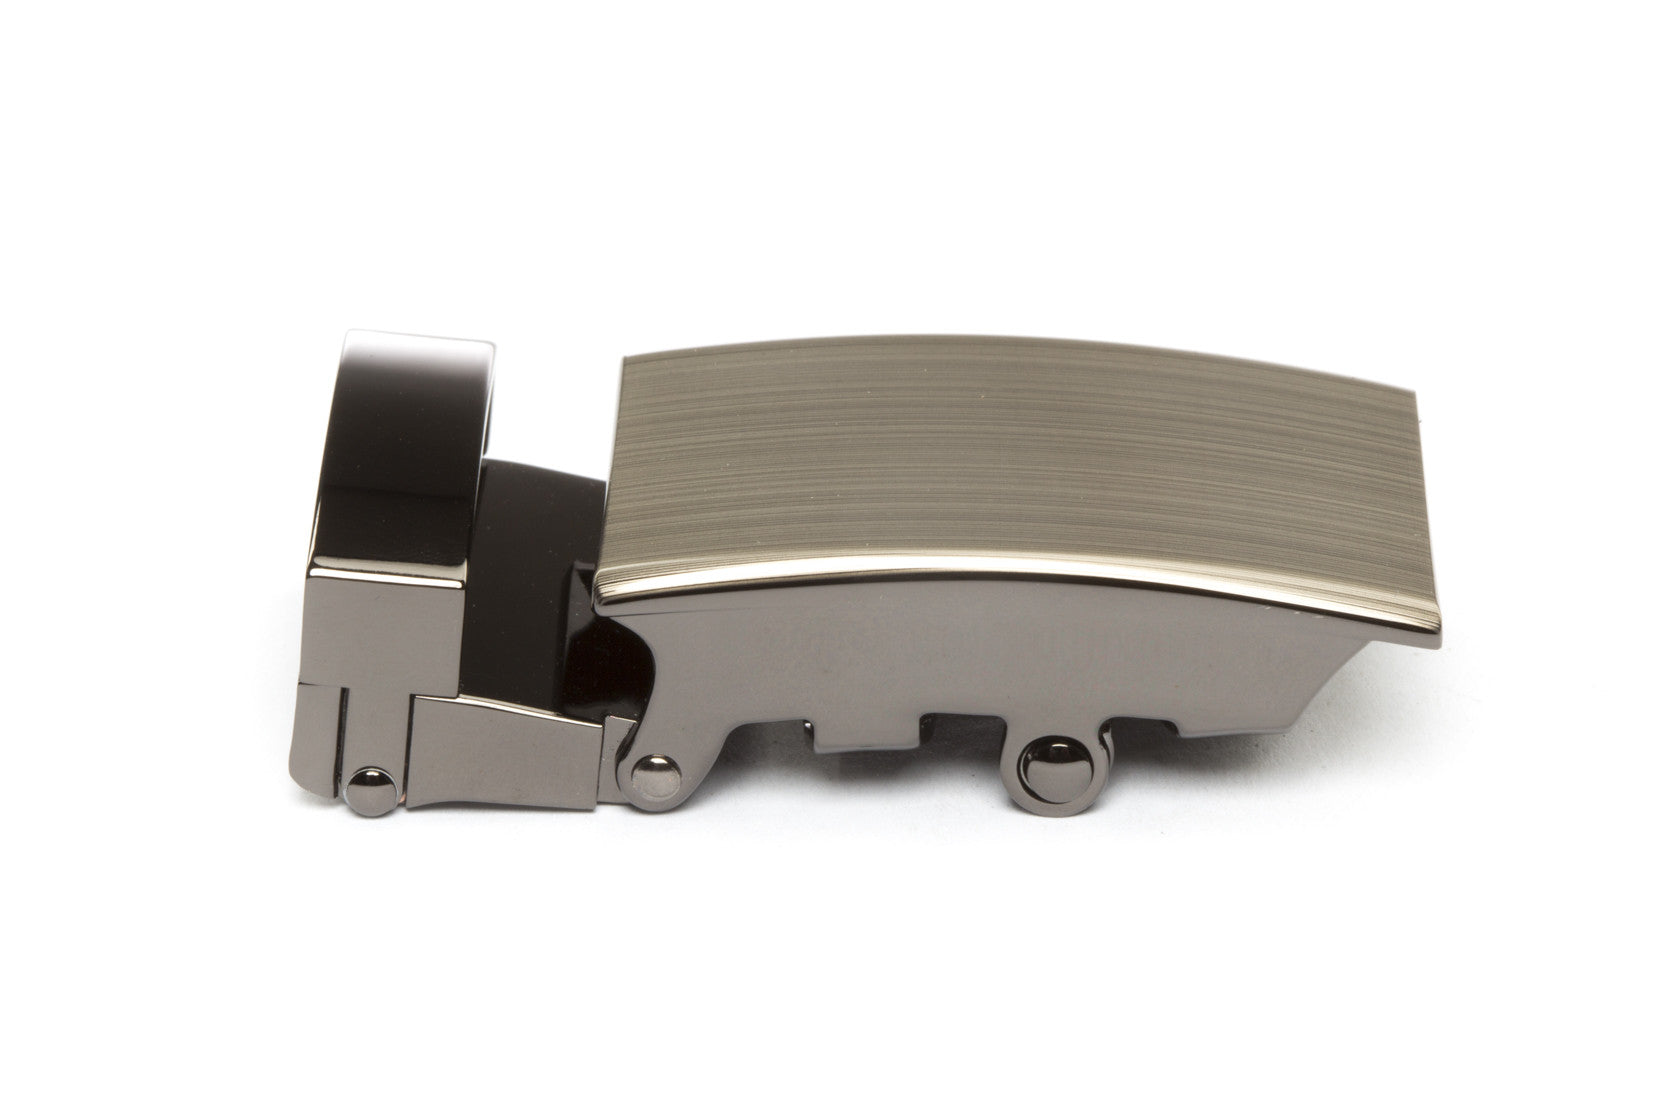 Men's classic ratchet belt buckle in formal gunmetal with a 1.25-inch width, right side view.